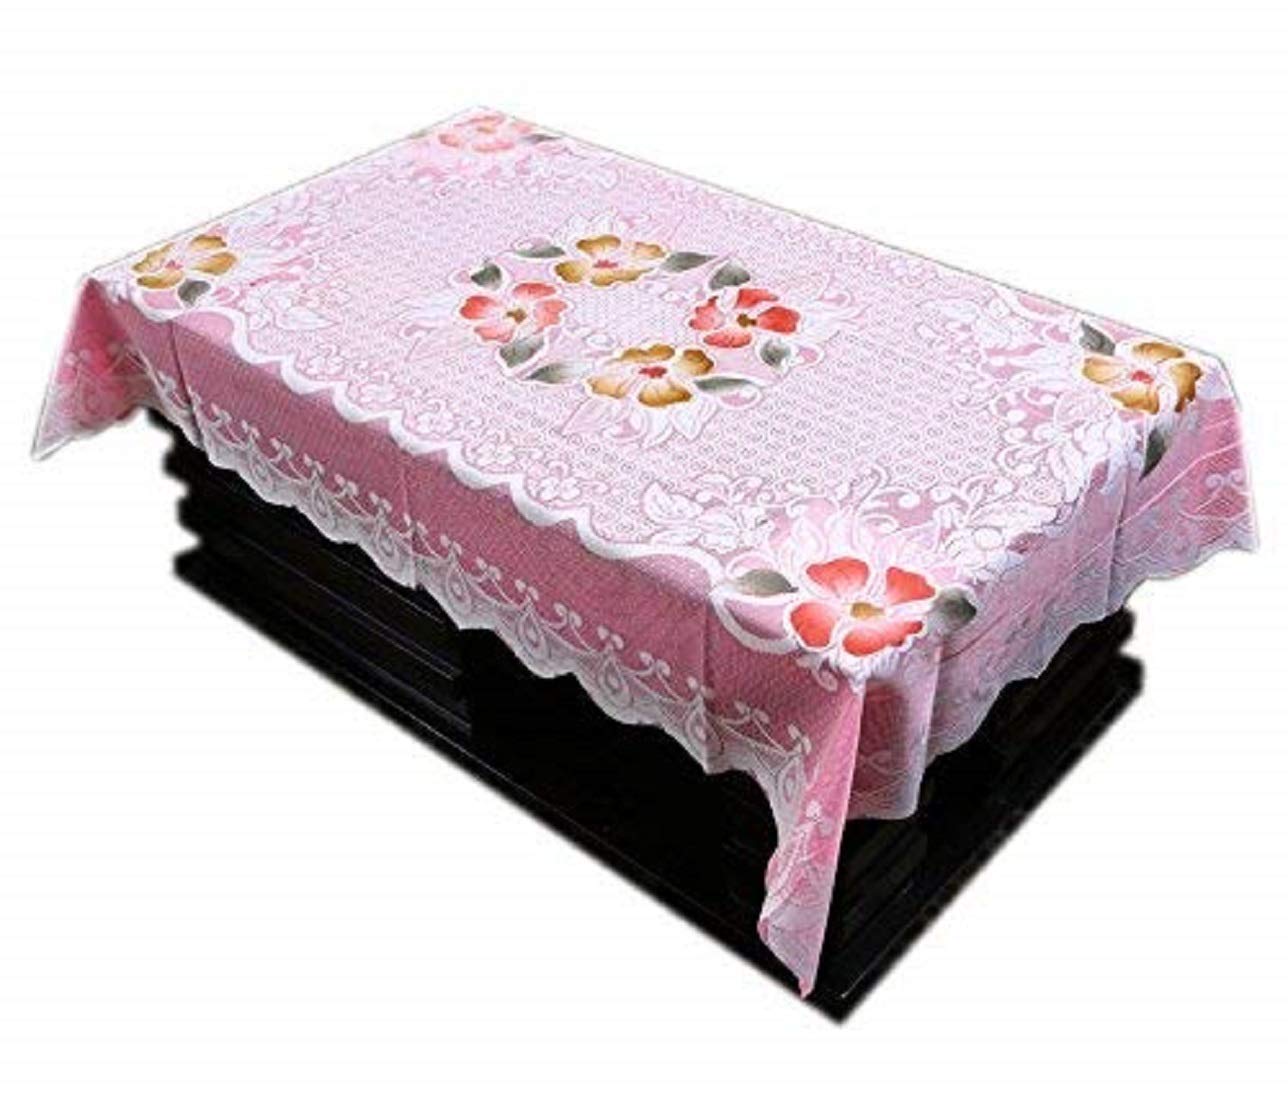 Kuber Industries Rectangular Cotton 4 Seater Centre Table Cover|Size 152 x 102 x 1 CM (Pink)